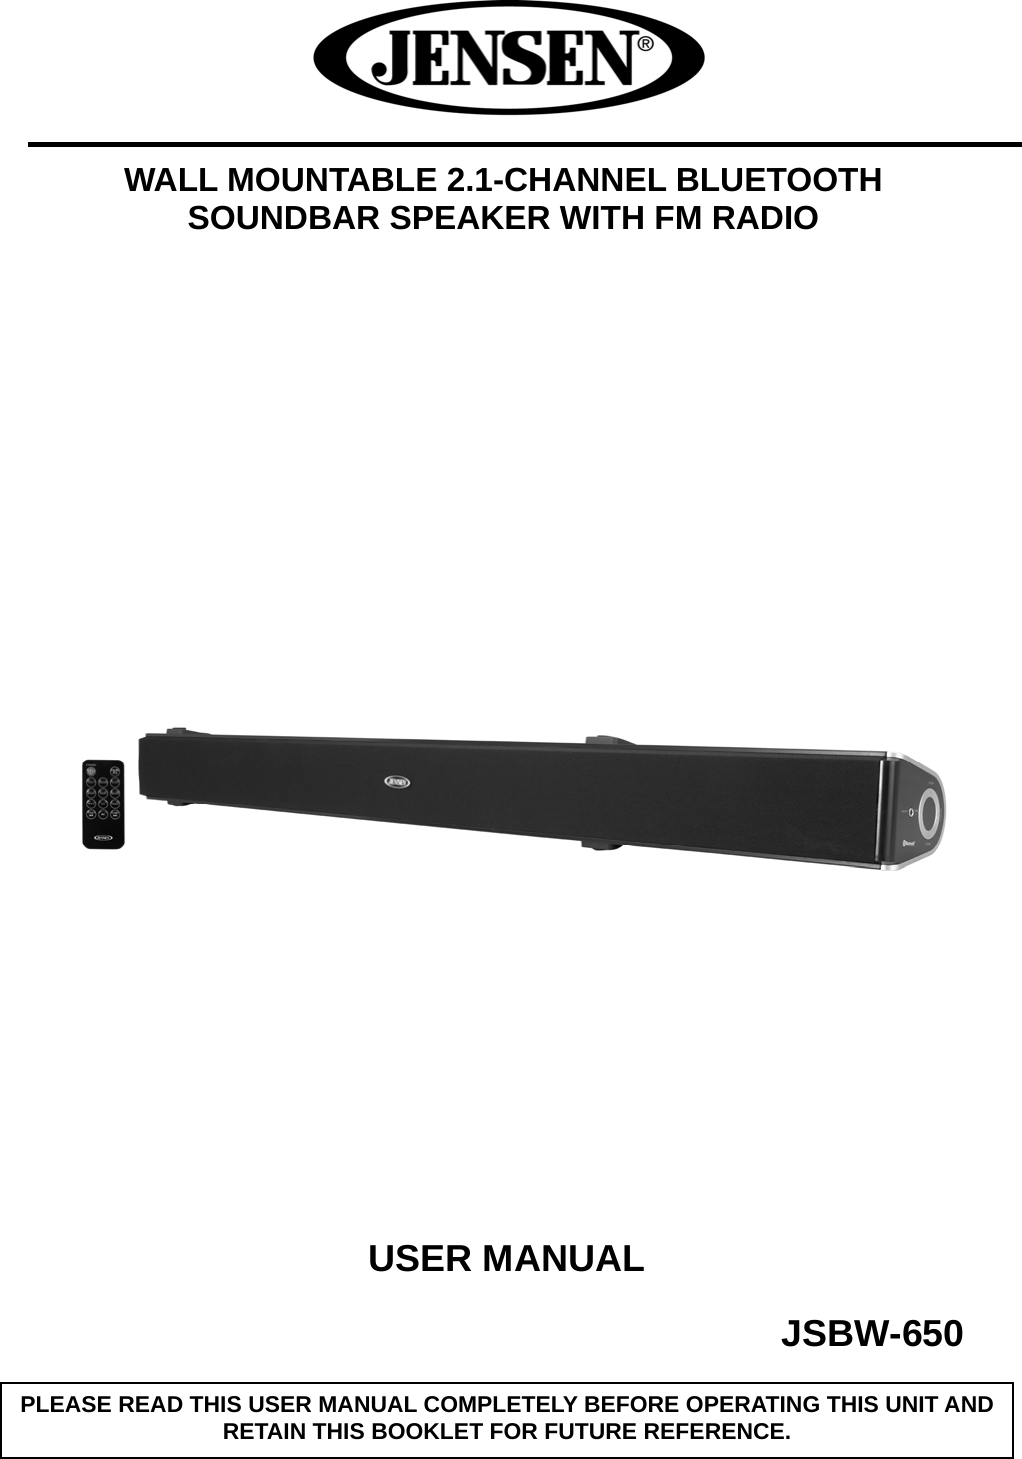      WALL MOUNTABLE 2.1-CHANNEL BLUETOOTH SOUNDBAR SPEAKER WITH FM RADIO                                                   USER MANUAL                                         JSBW-650    PLEASE READ THIS USER MANUAL COMPLETELY BEFORE OPERATING THIS UNIT AND RETAIN THIS BOOKLET FOR FUTURE REFERENCE. 